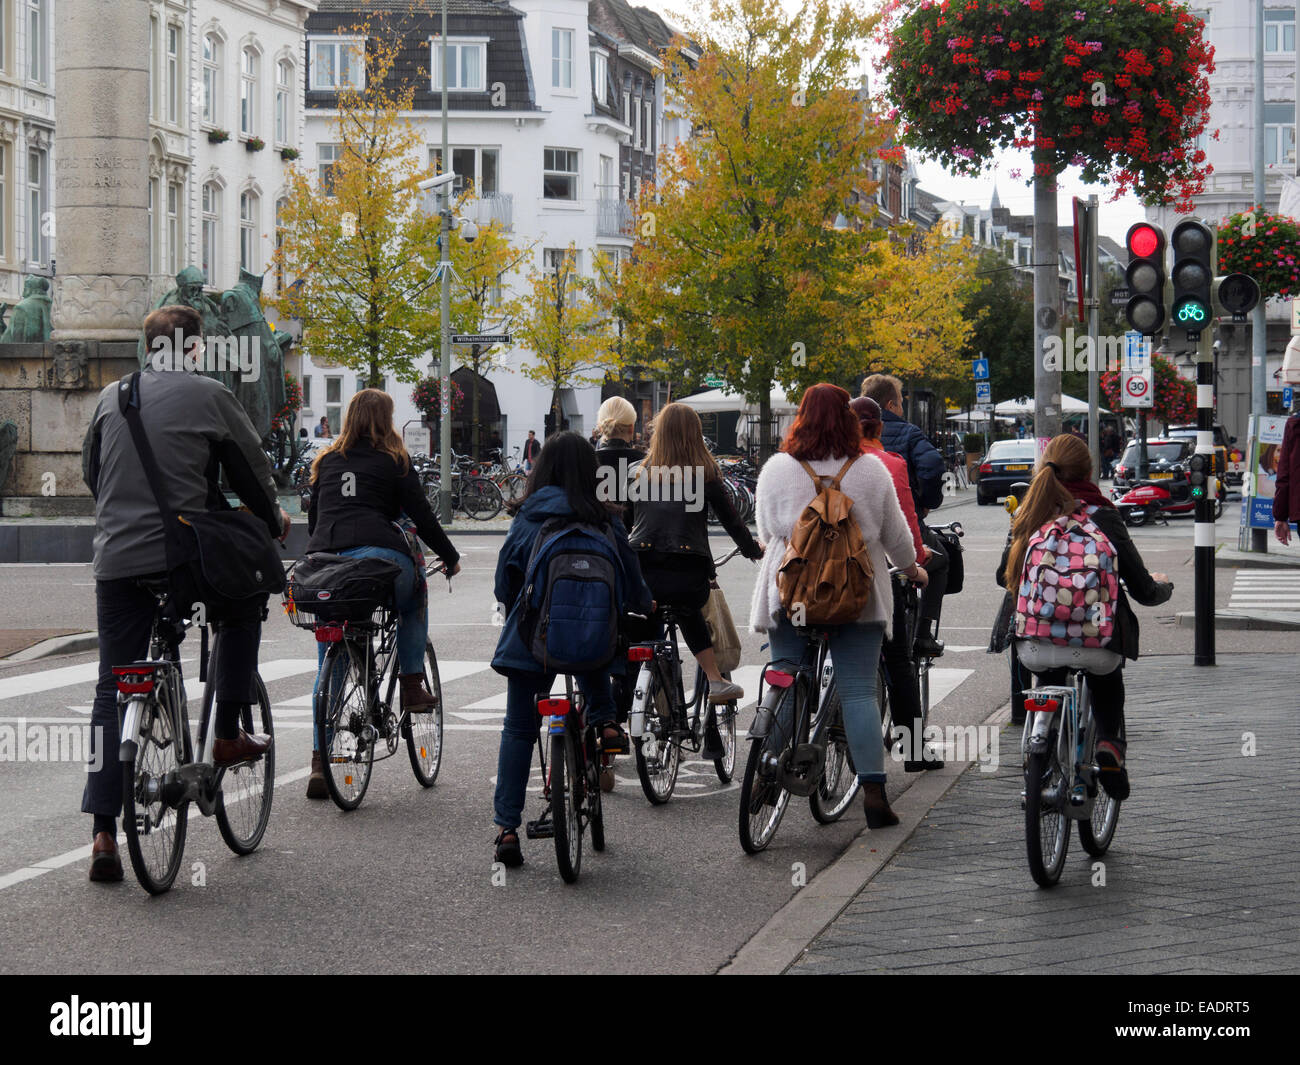 Cyclists waiting for green light at a stoplight in Maastricht, The Netherlands, Europe Stock Photo